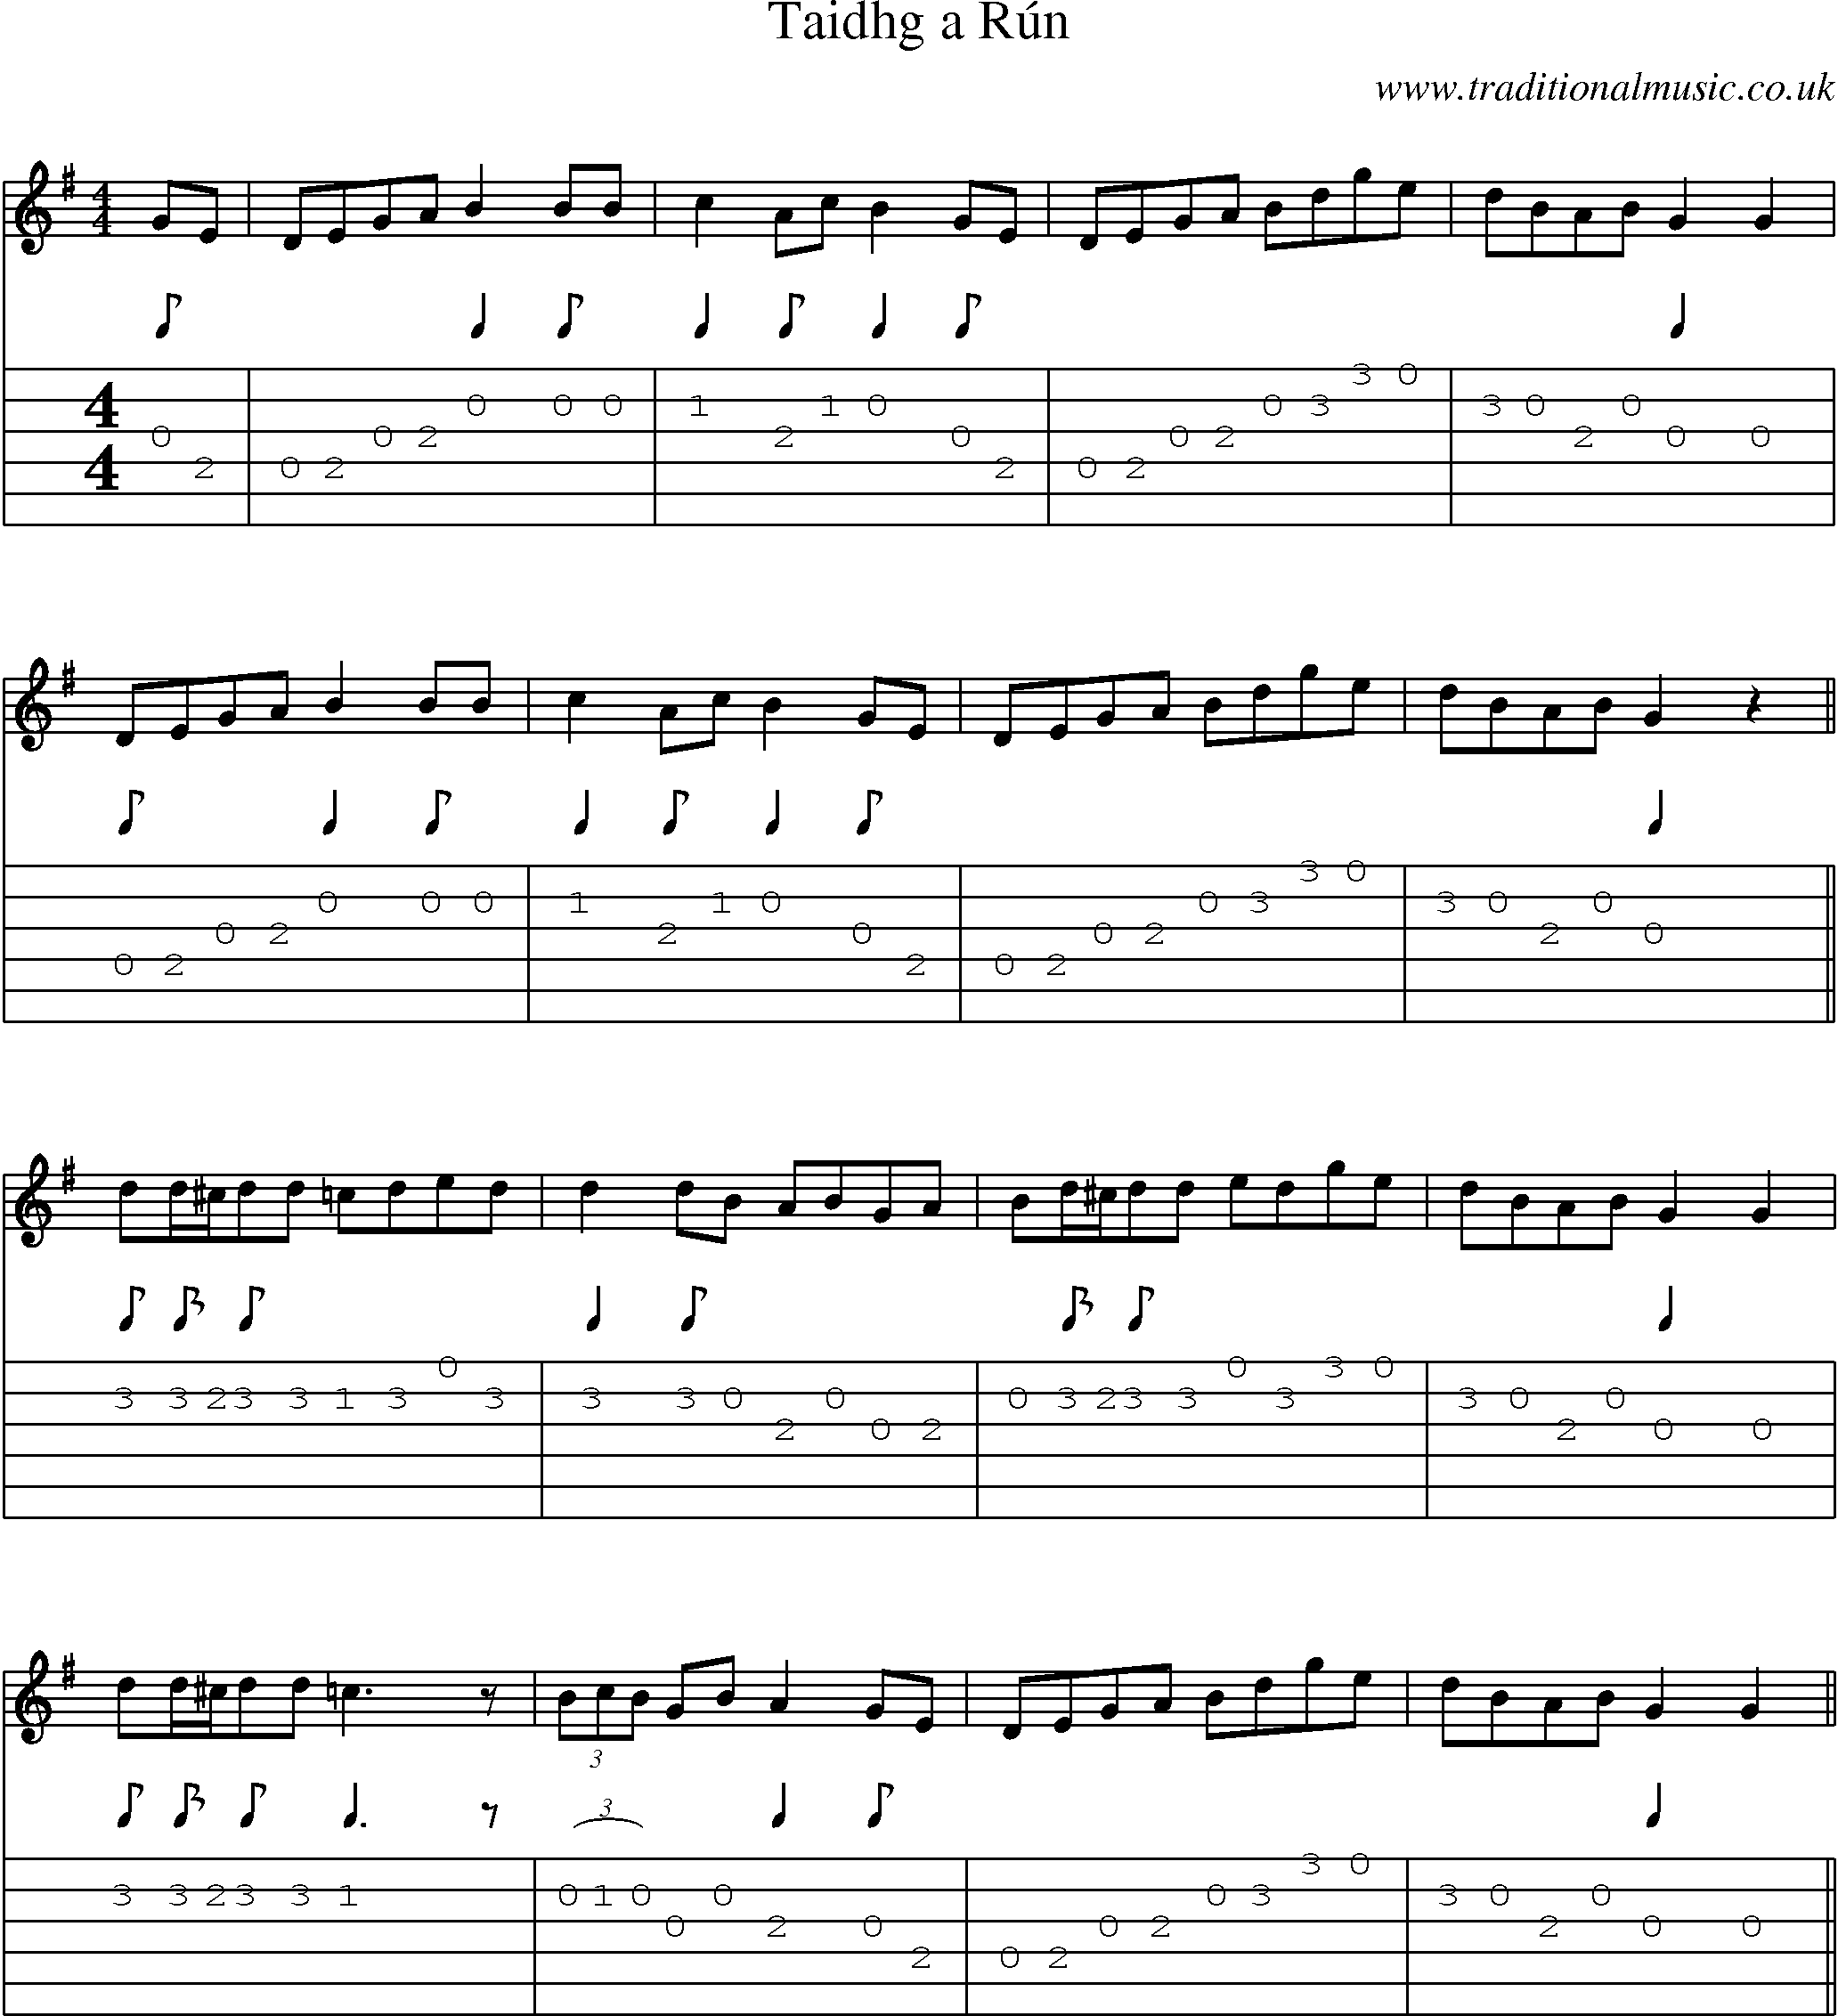 Music Score and Guitar Tabs for Taidhg A Run